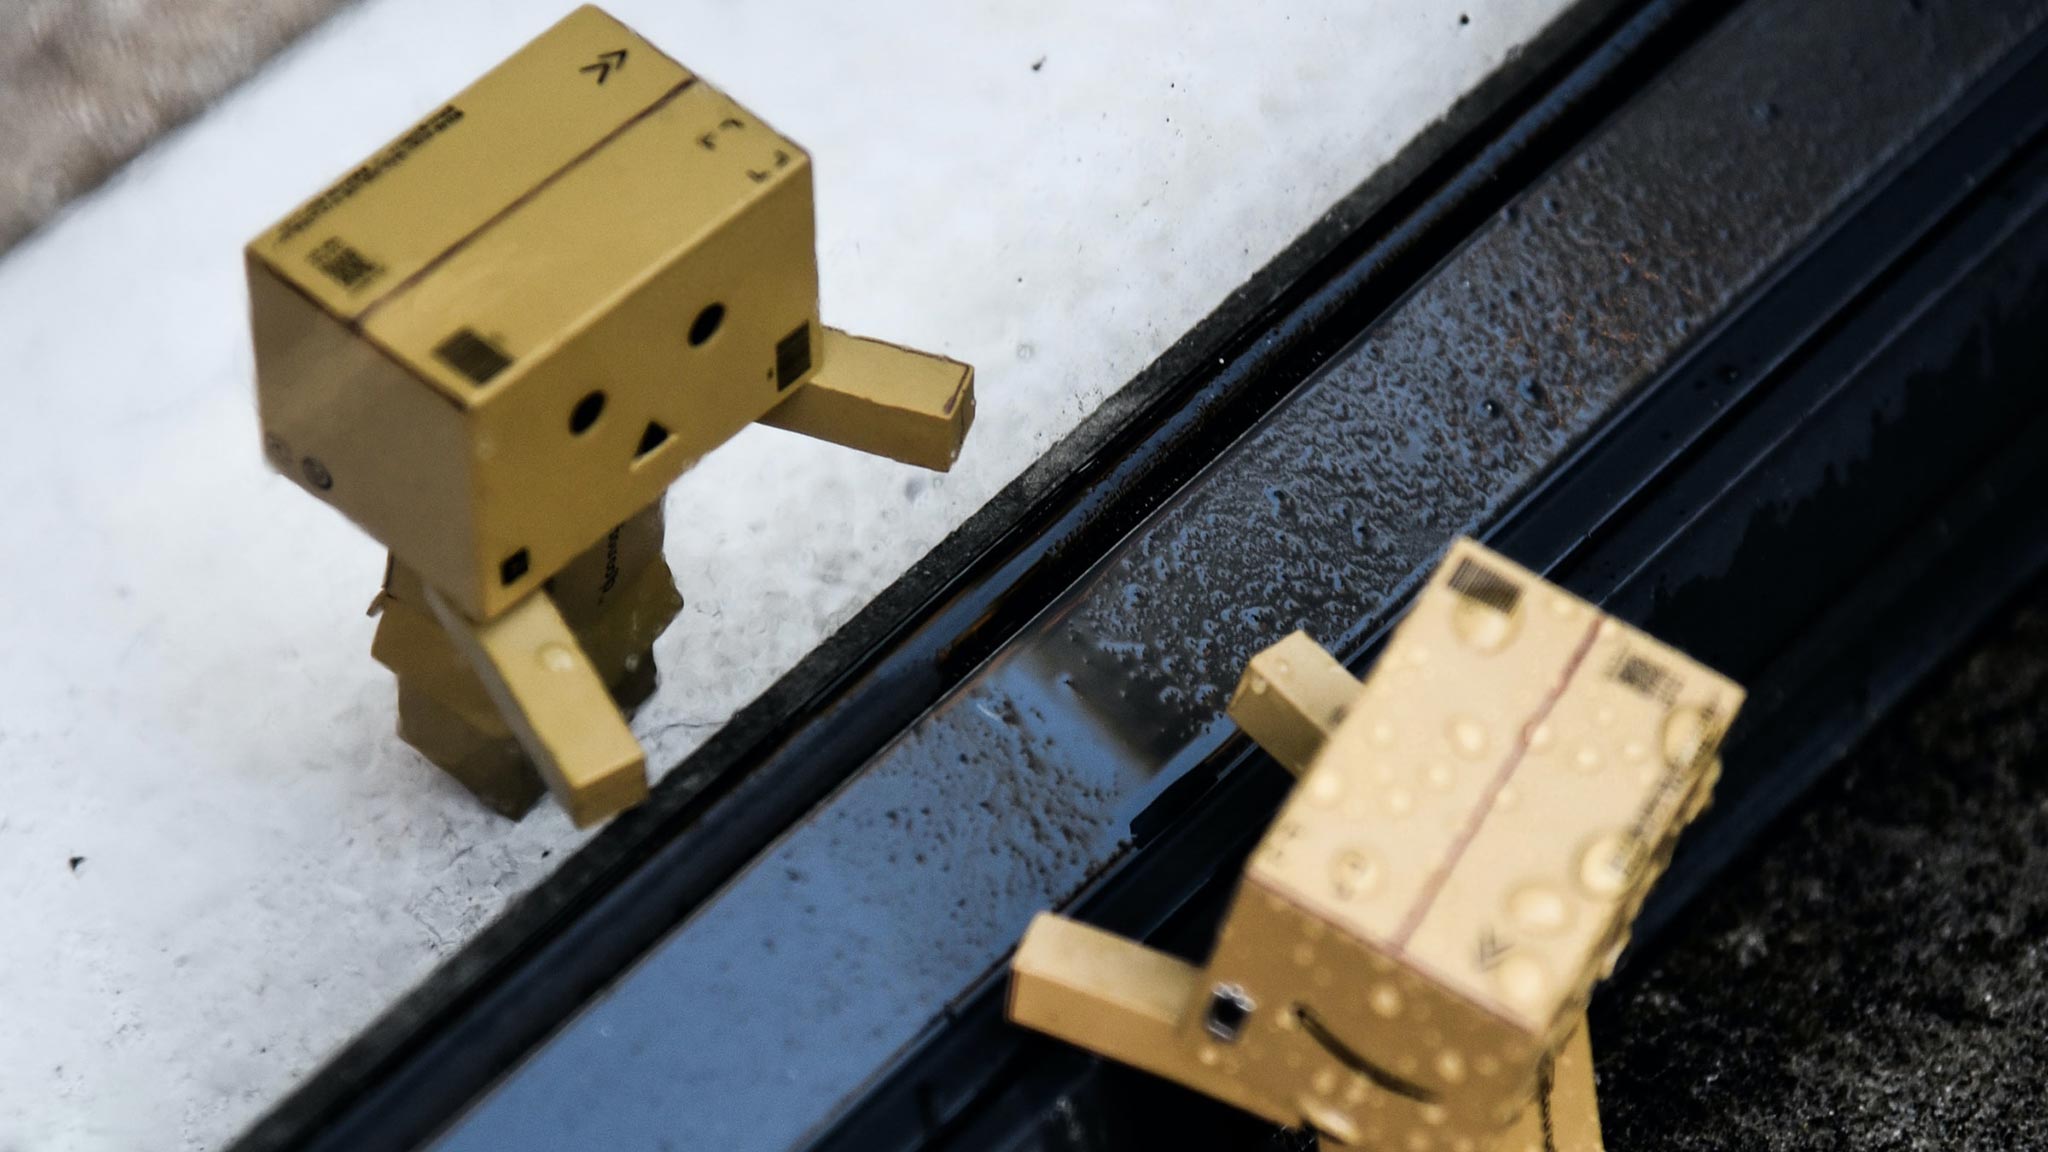 Macro Photograph Of Two Tiny Cardboard Box Robots Reaching For One Another With Barrier Between Them